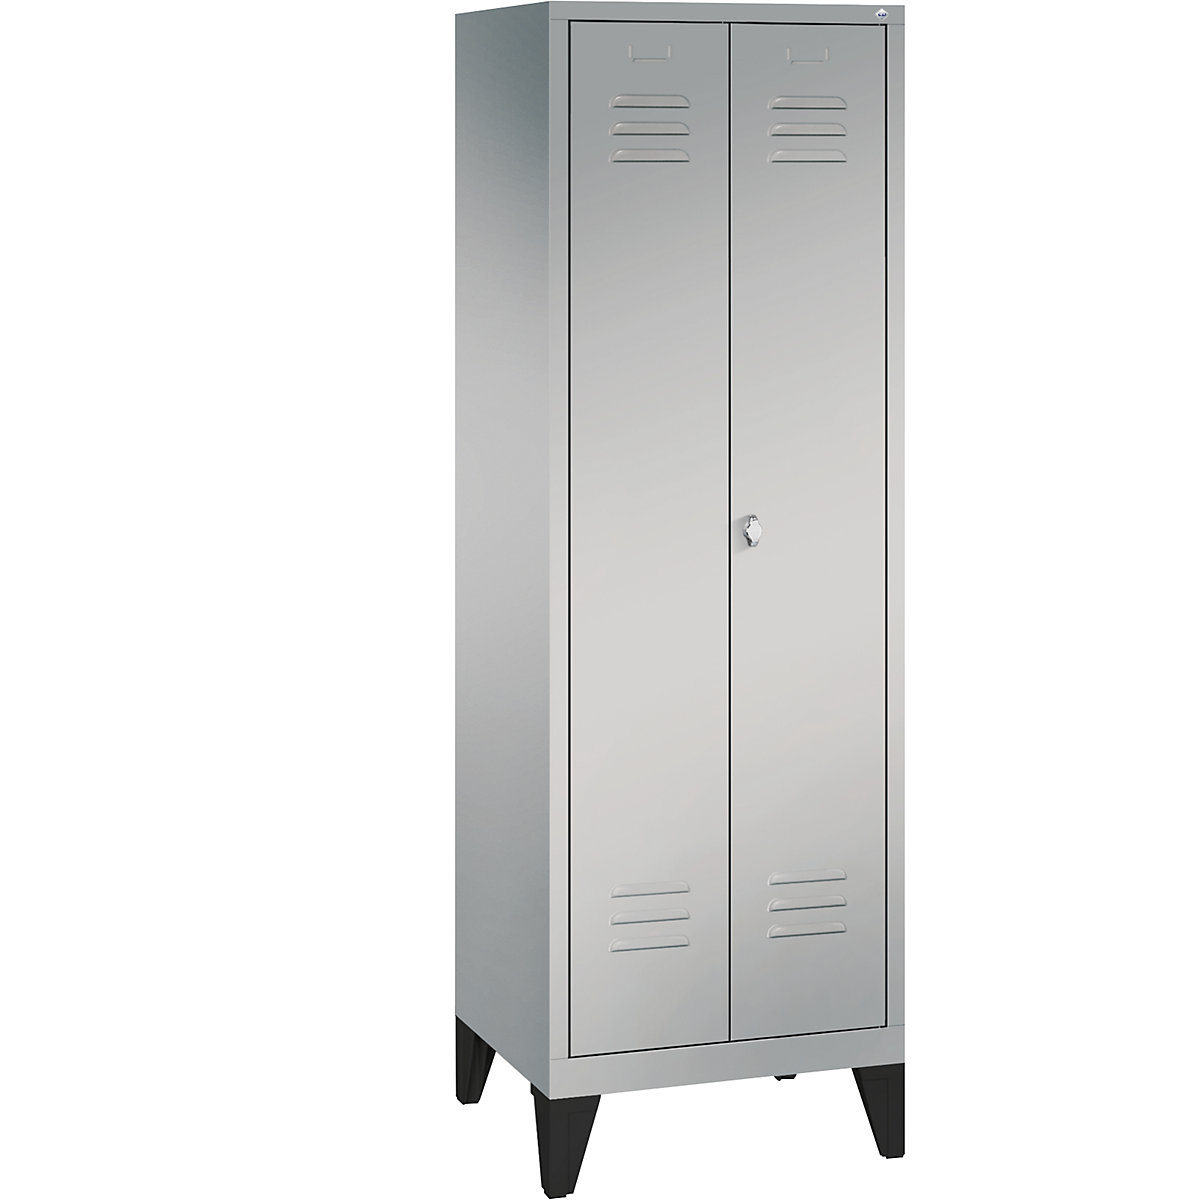 CLASSIC equipment cupboard with feet – C+P, 2 compartments, compartment width 300 mm, white aluminium-5